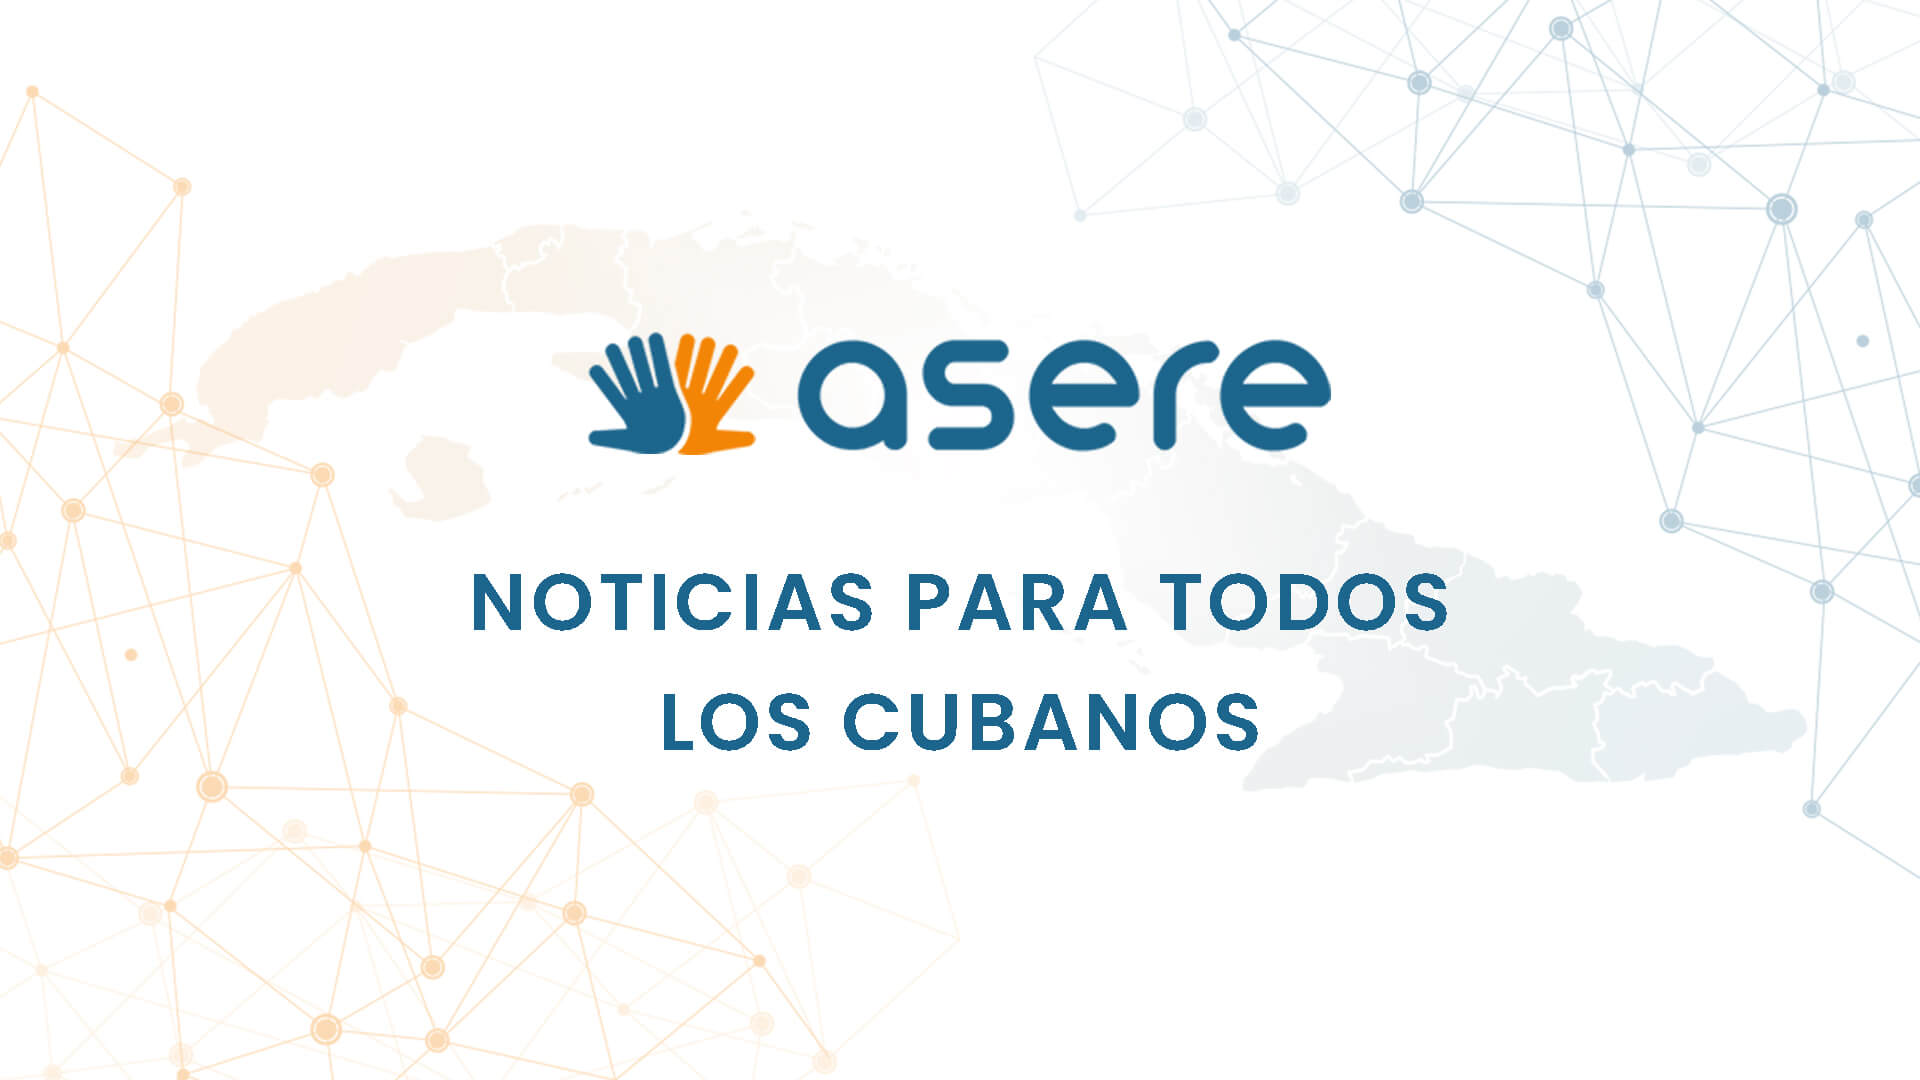 www.asere.com